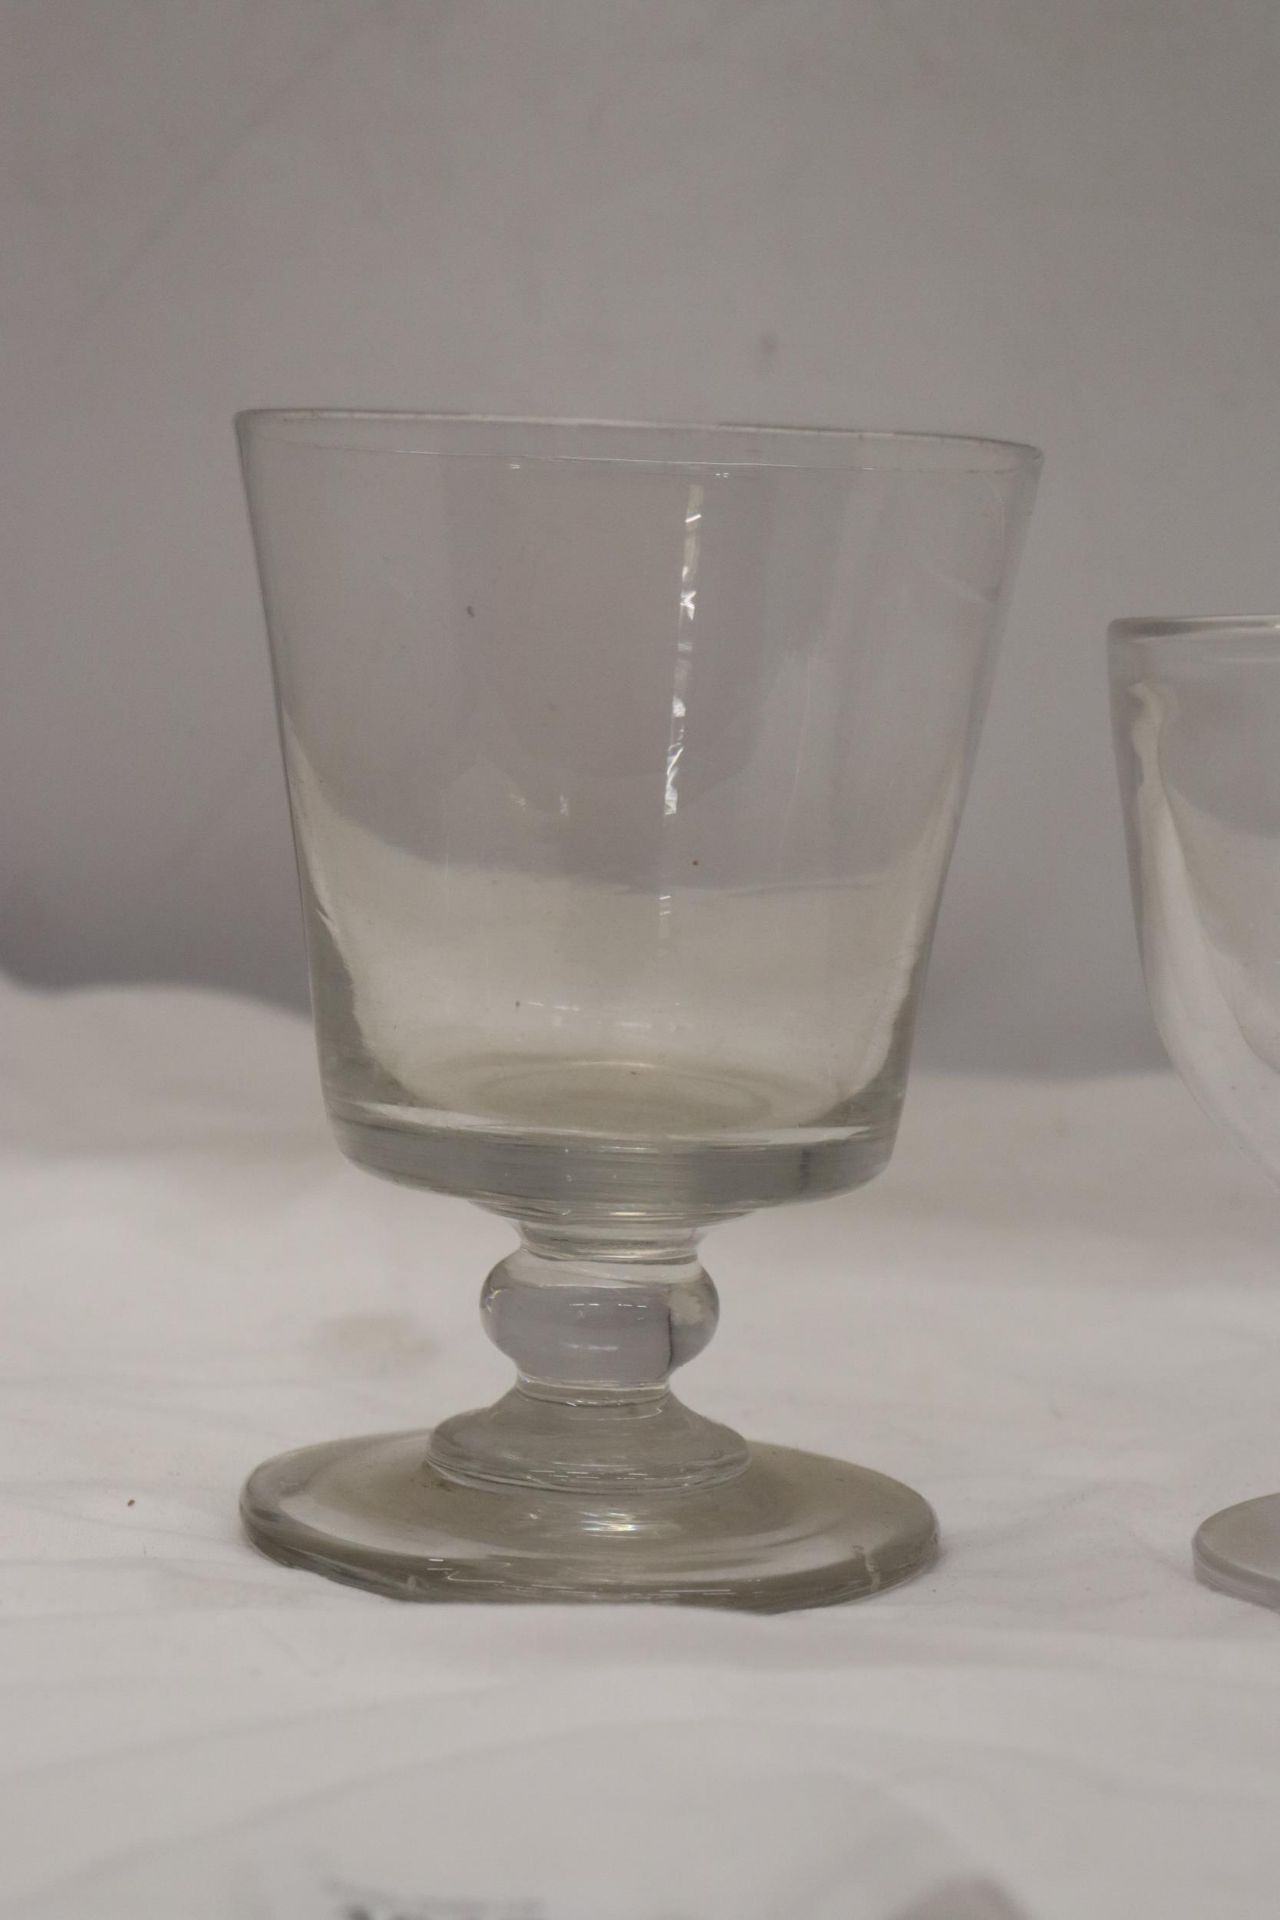 A VINTAGE WEDGWOOD CLEAR GLASS GOBLET WITH MAYFLOWER SAILING SHIP EMBLEM PLUS A LARGE HAND BLOWN - Image 3 of 5